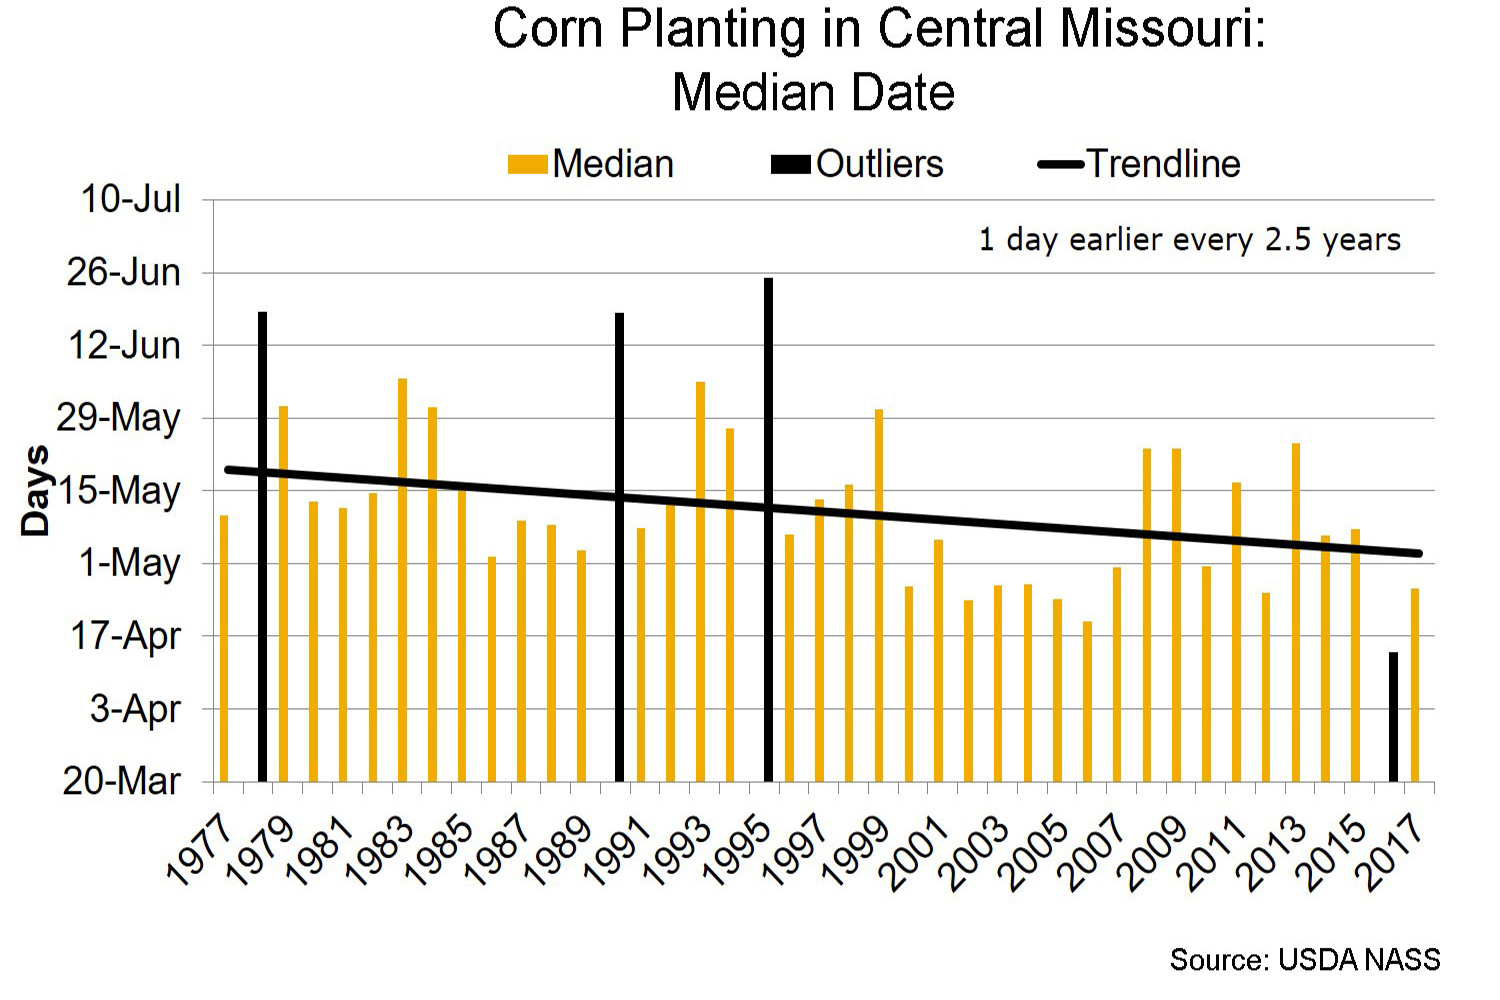 Corn planting in central Missouri median date chart